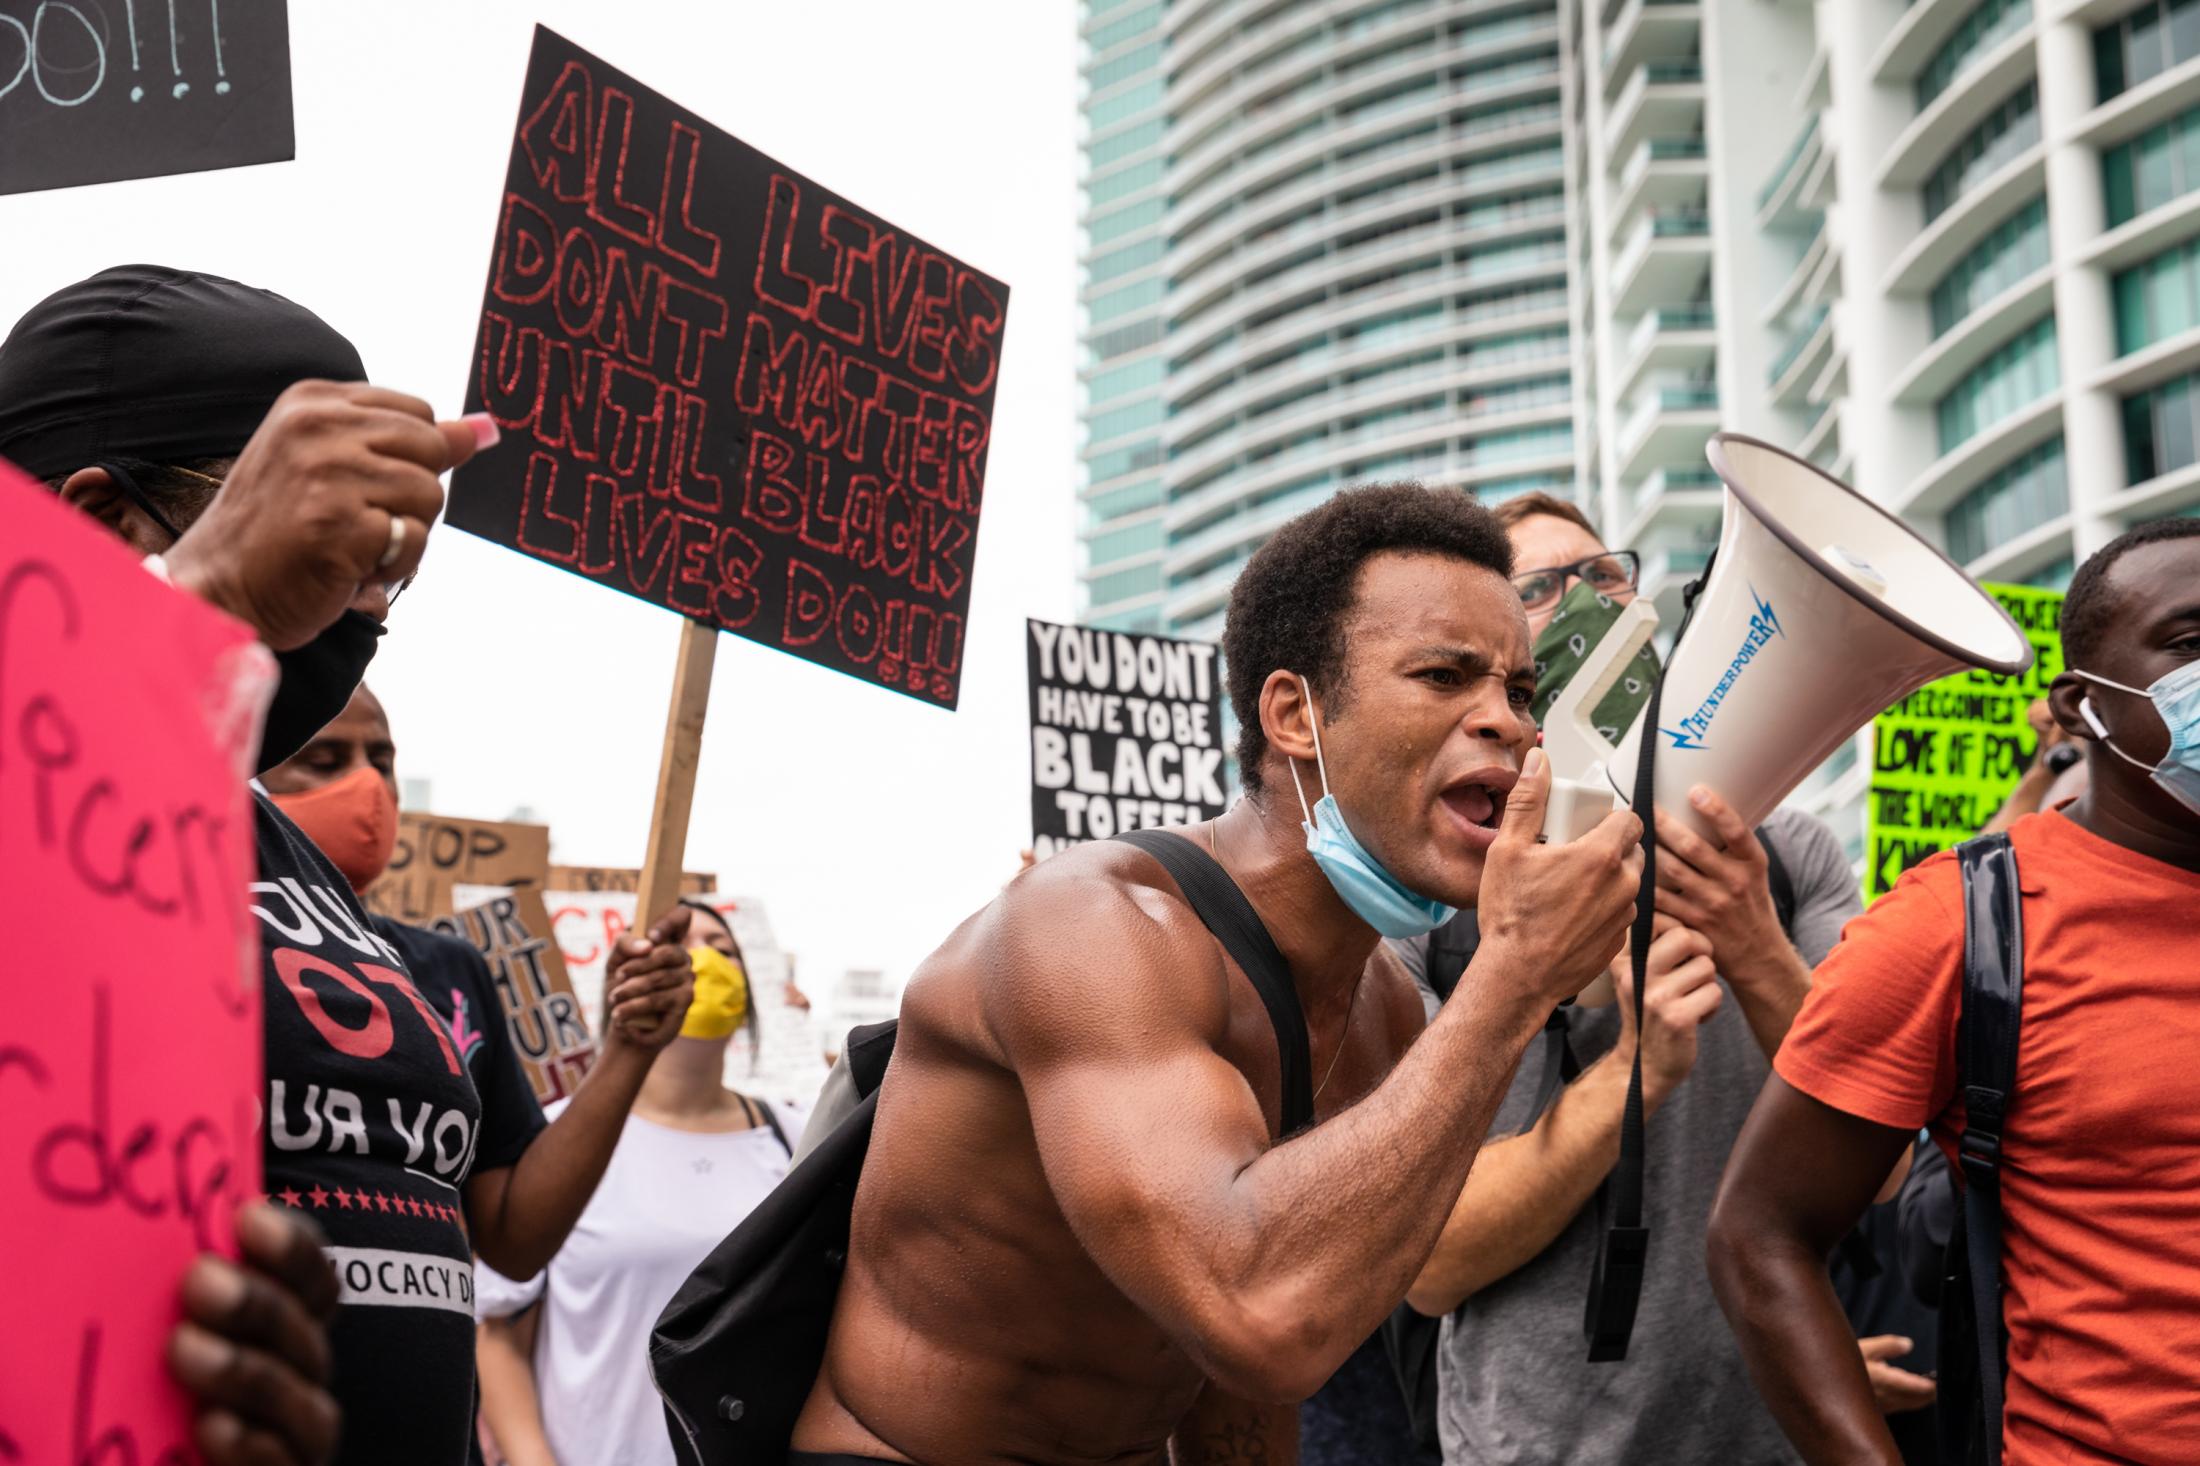 Miami, Black Lives Matter Protests - BLM Protest on Biscayne Blvd, Miami, Florida June 6, 2020 Jonathan Gartrelle stops to call out to...